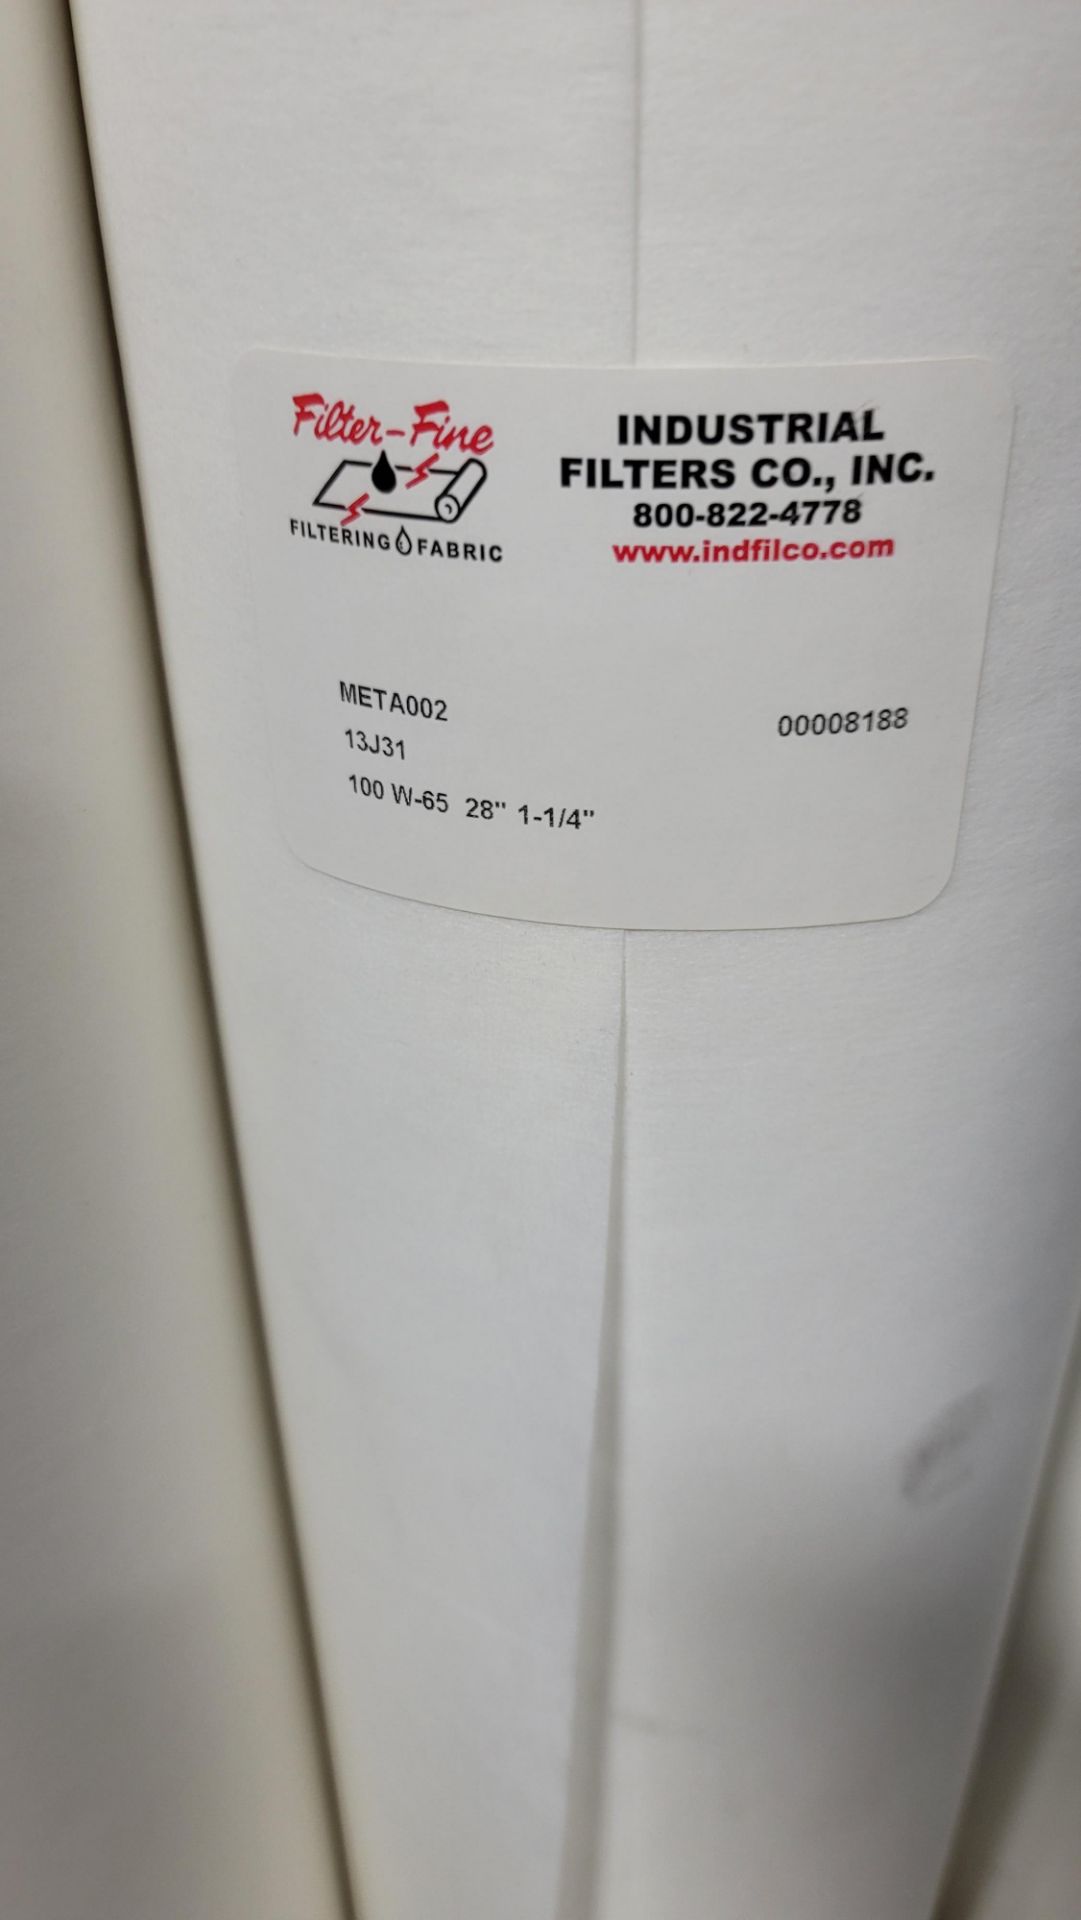 LOT - CONTENTS ONLY OF STORAGE CABINET, TO INCLUDE: (10) ROLLS OF FILTER-FINE FILTERING FABRIC, - Image 2 of 3